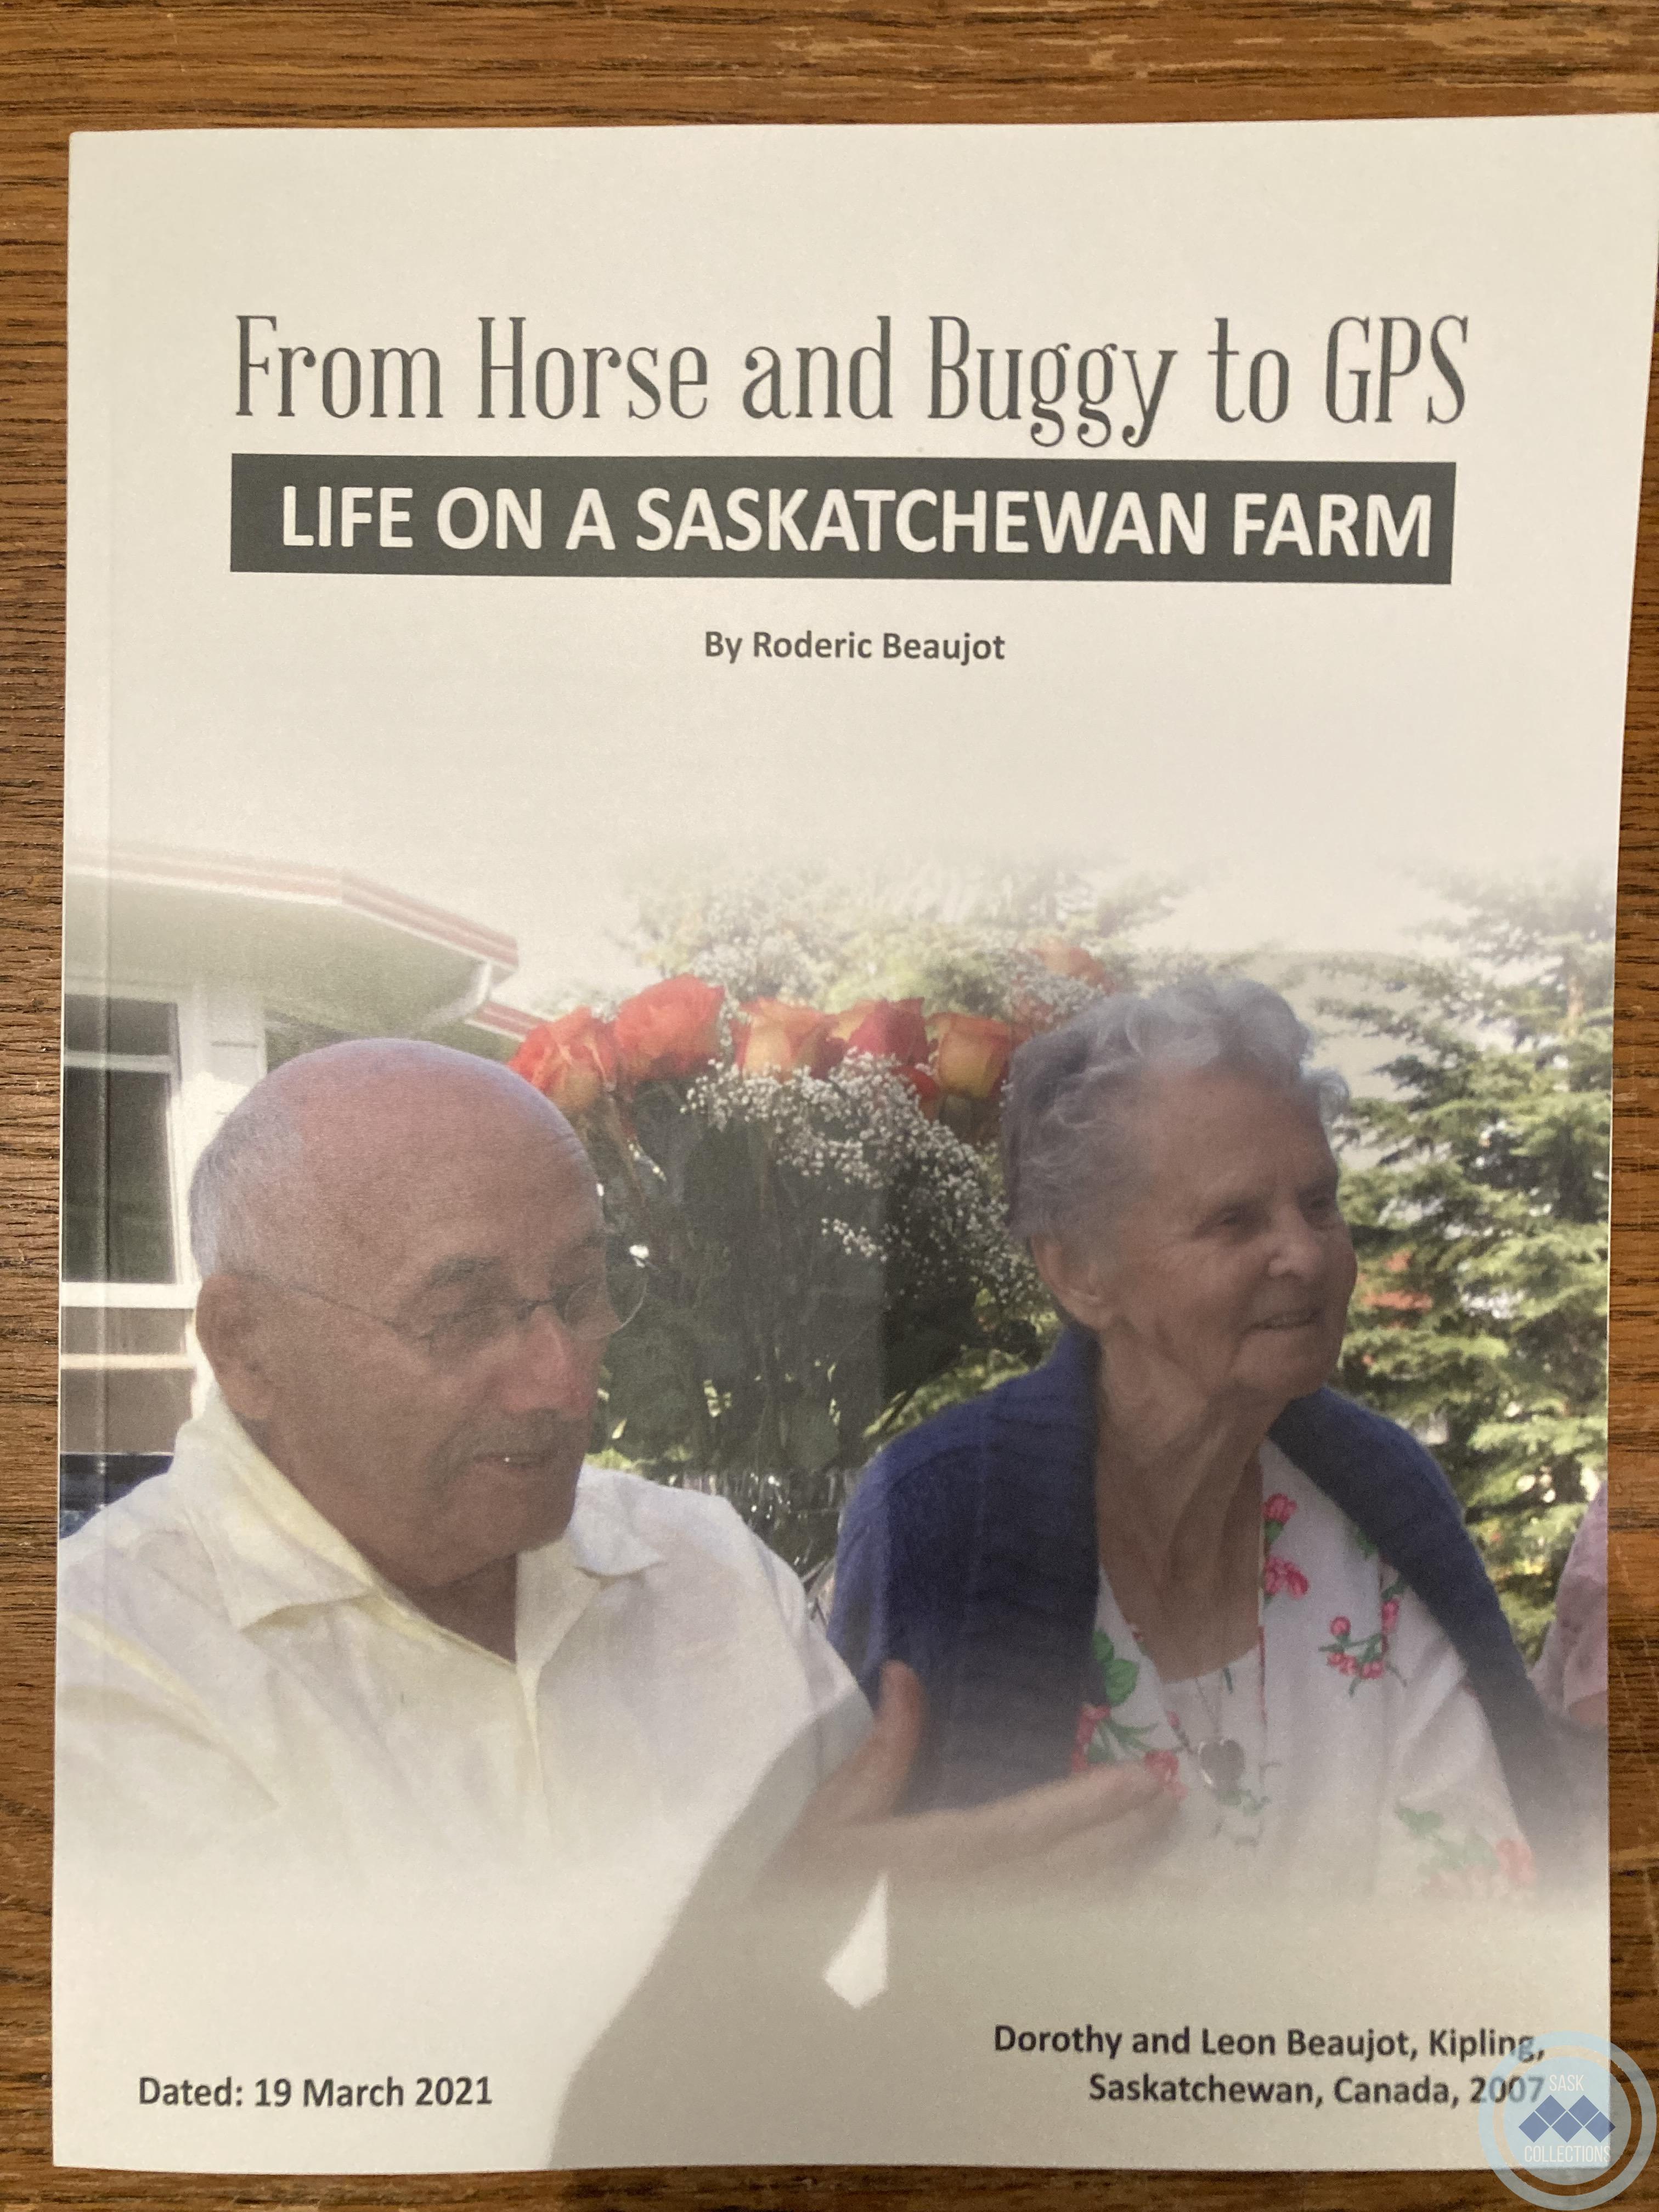 Book - From Horse and Buggy to GPS - Life on a Saskatchewan Farm